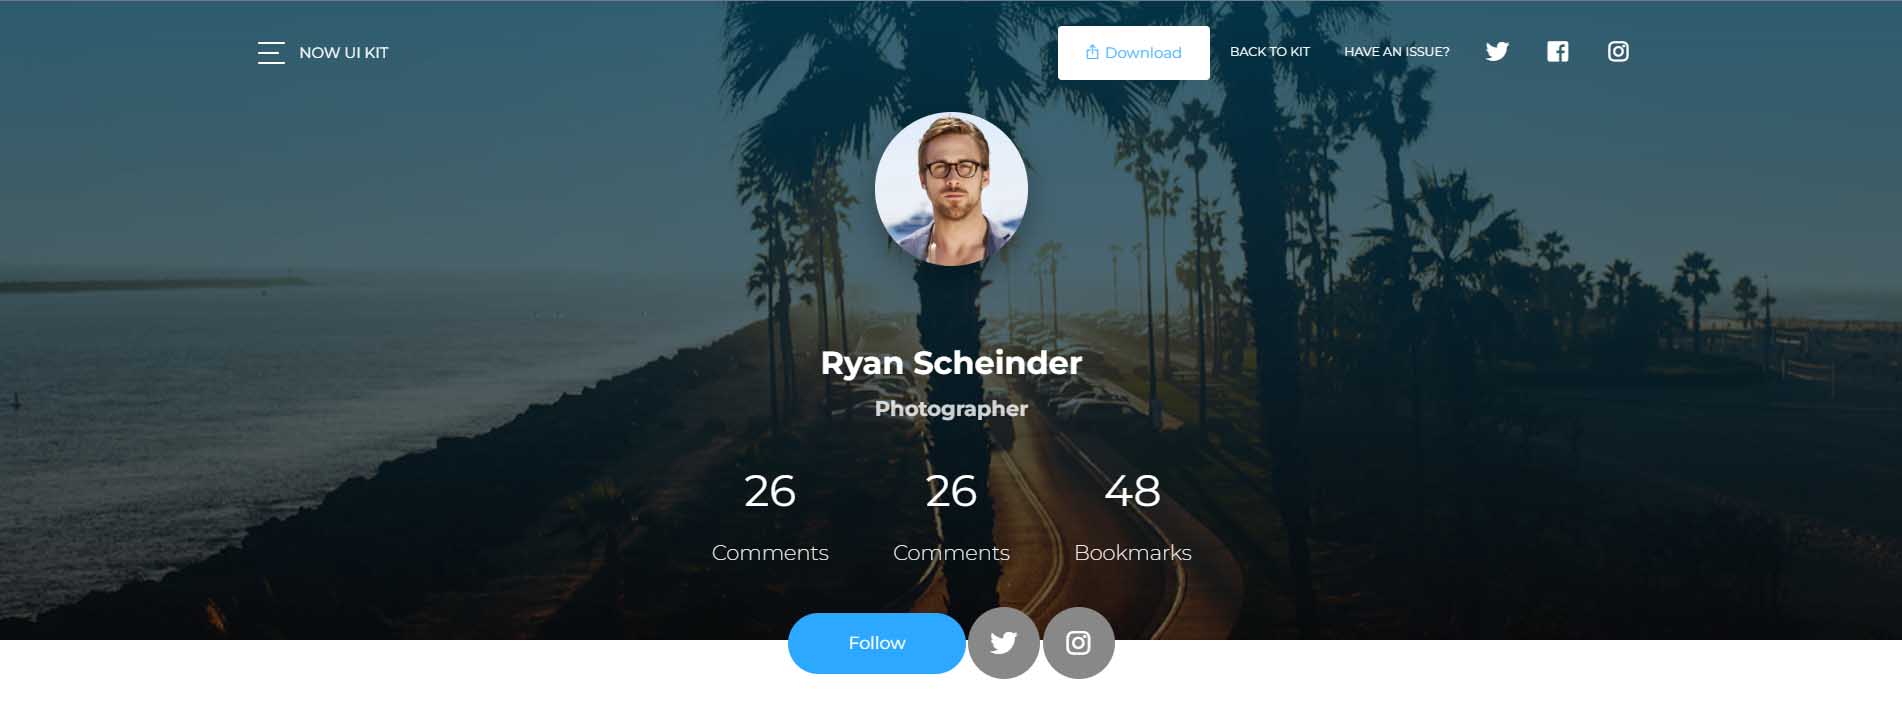 Now UI Kit React - Profile Page (Open-Source Template)